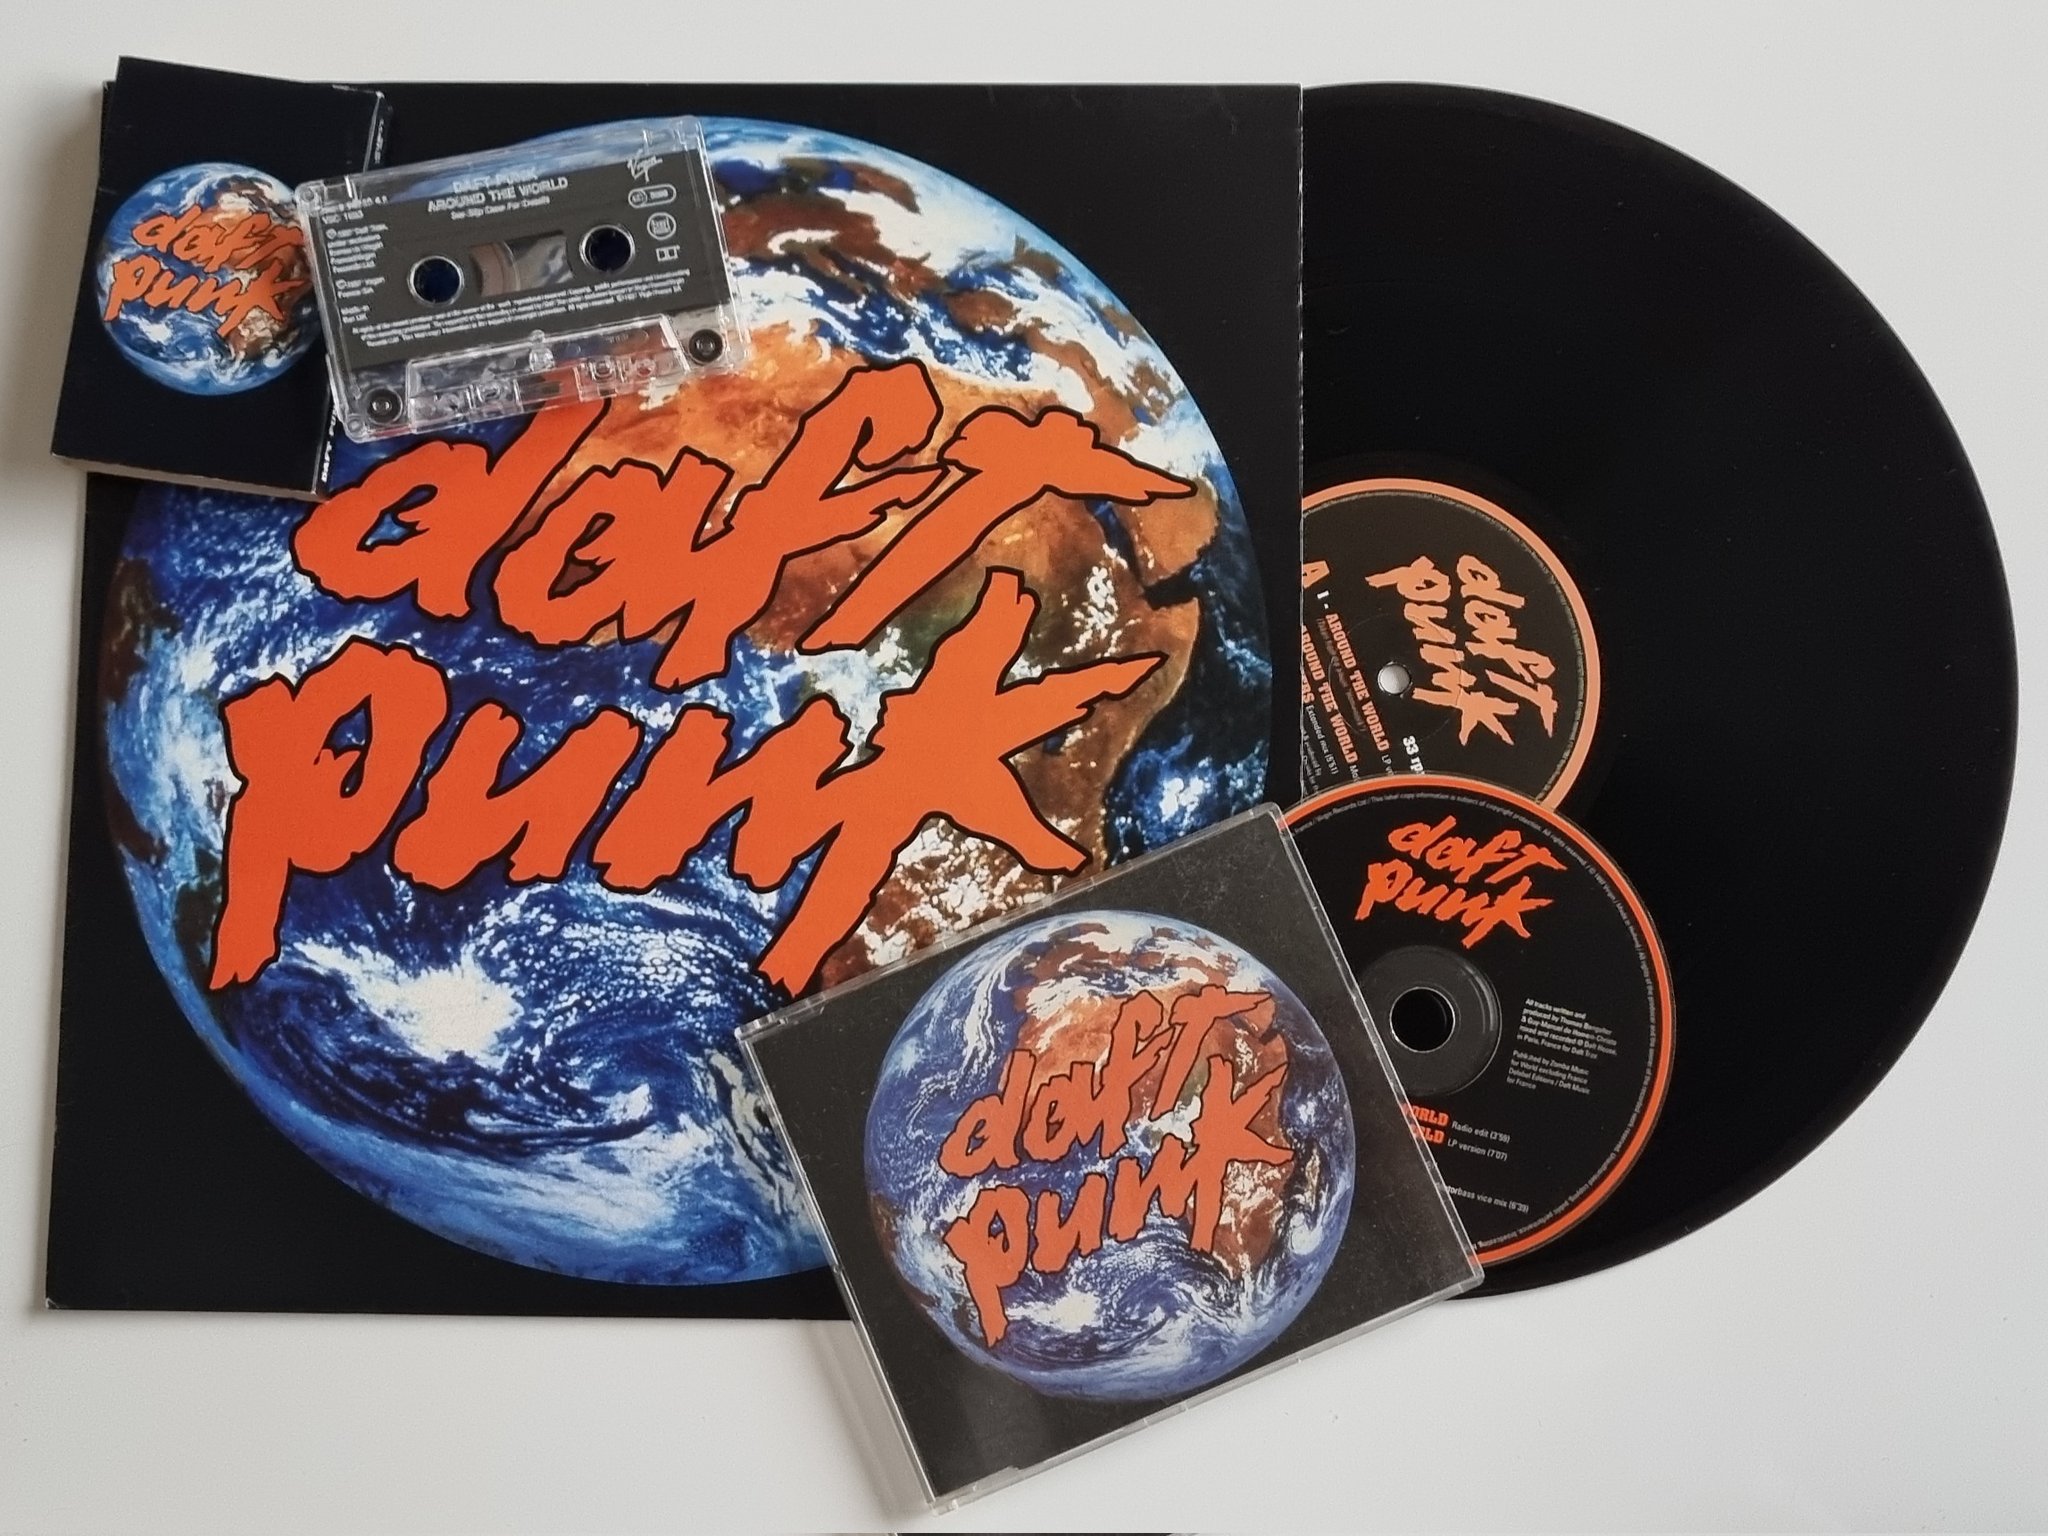 daft punk (around the world) maxi 1997 (b-28) - Buy Maxi Singles of  Electronic, Avangarde and Experimental Music on todocoleccion